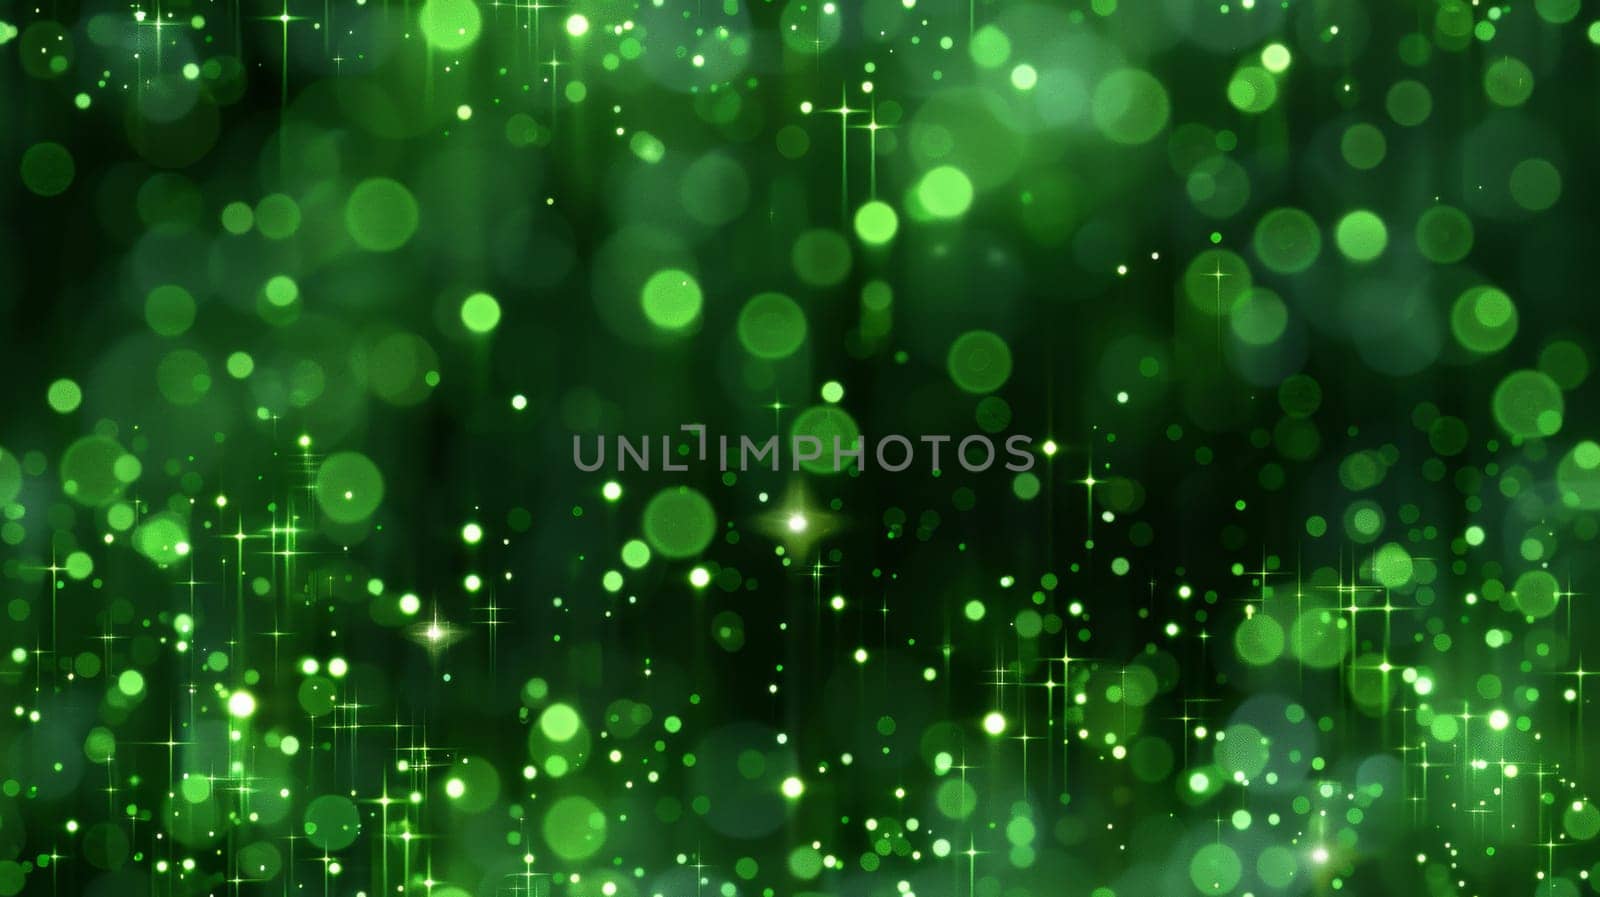 A green sustainable abstract background with blurred falling bright dots by papatonic